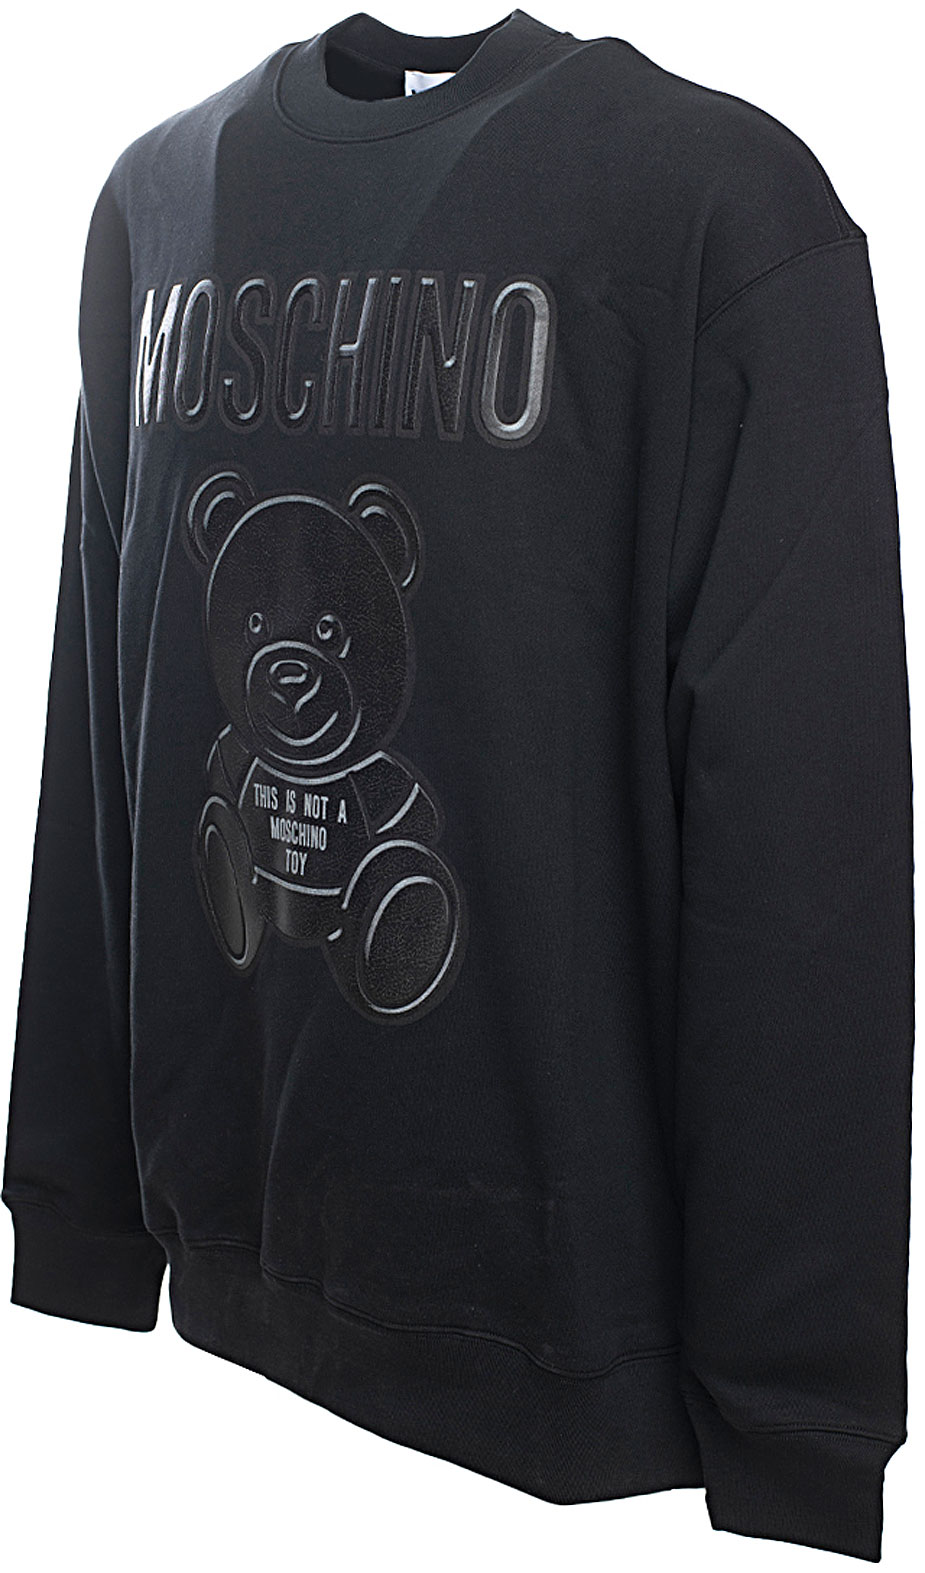 Mens Clothing Moschino, Style code: 1713-7028-1555